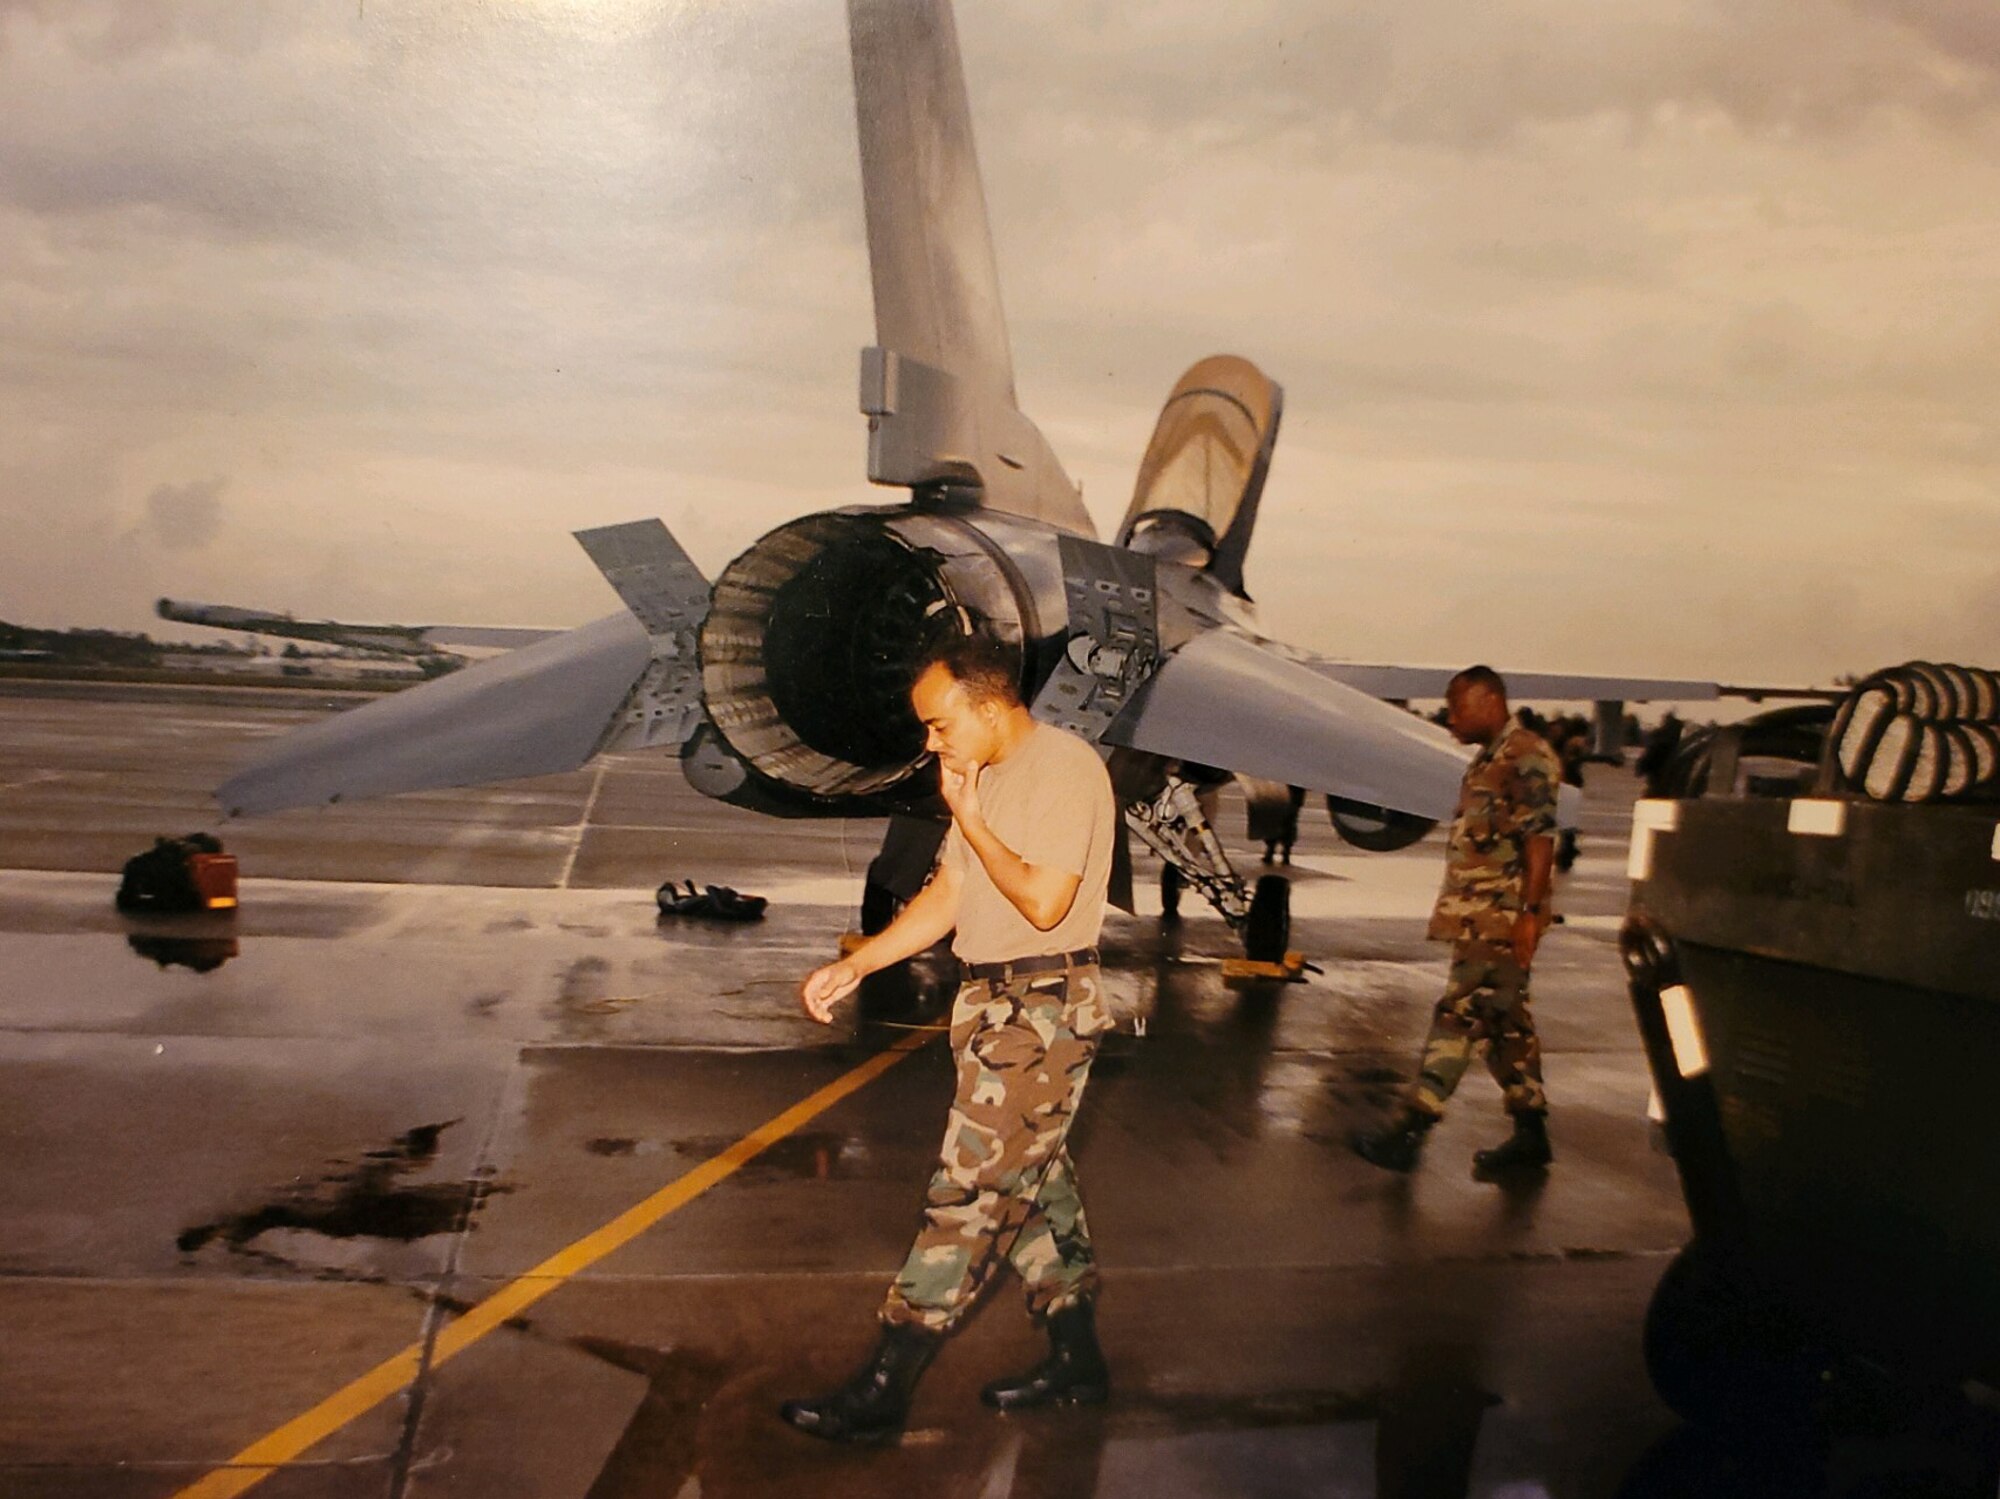 On September 11, 2001, Michael Harris’ shift started before dawn like any other day at Joint Base Andrews: generating airpower. He was responsible for getting F-16s launched and recovered. Harris served as a Minuteman for the last few years retiring in March 2021.